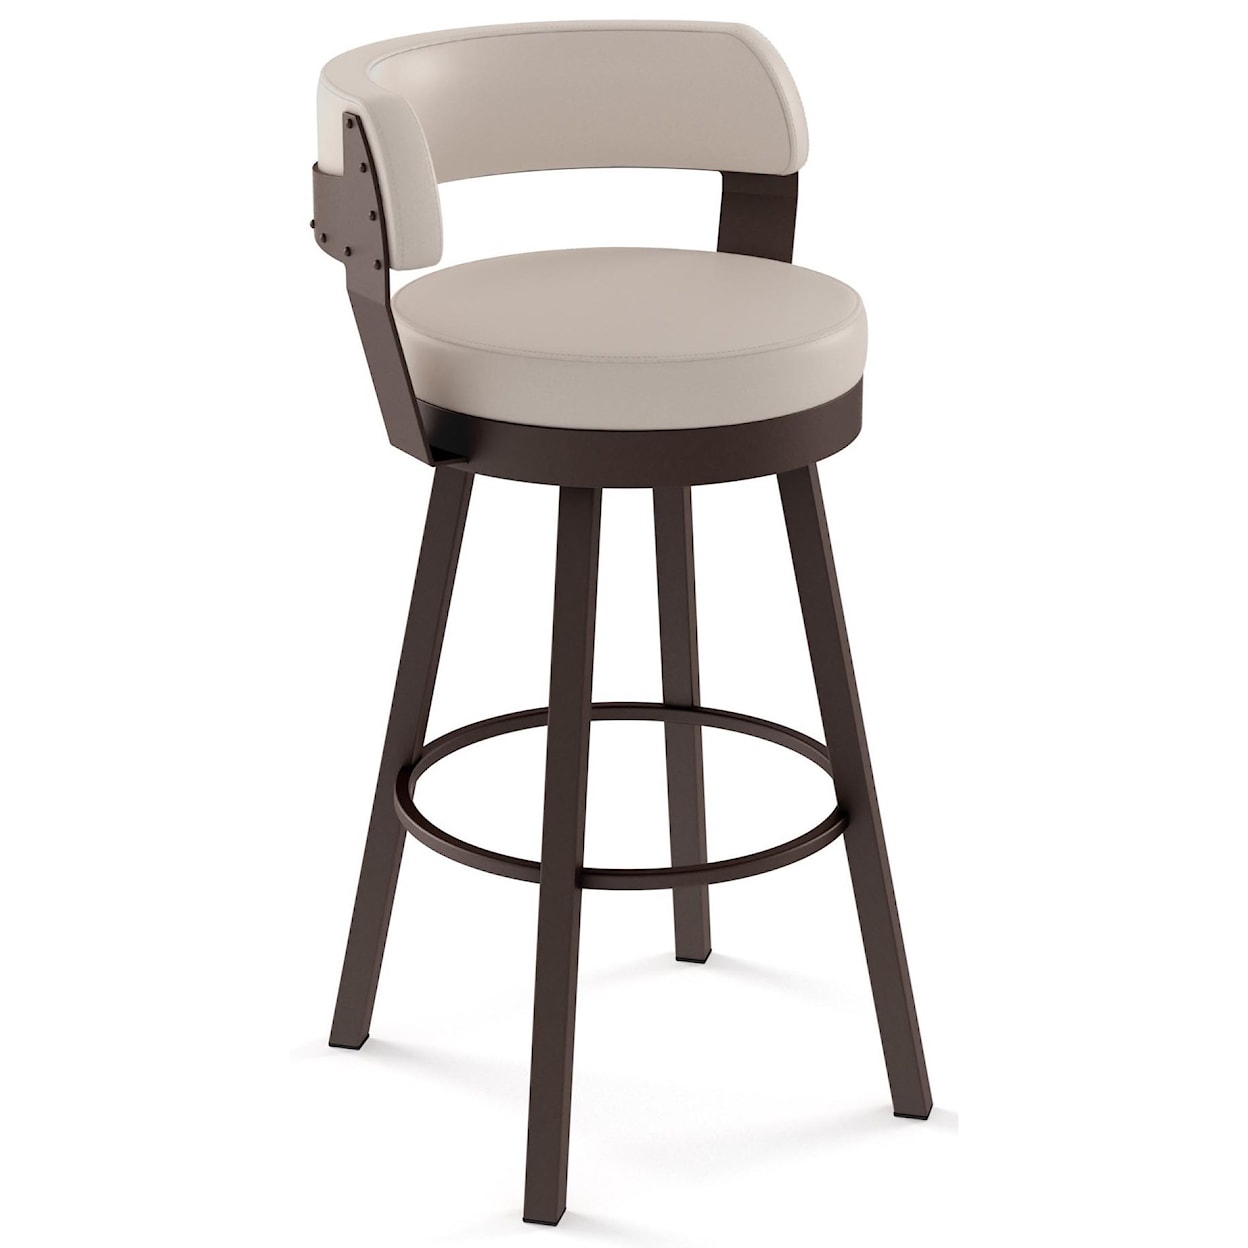 Amisco Industrial 30" Russell Swivel Stool